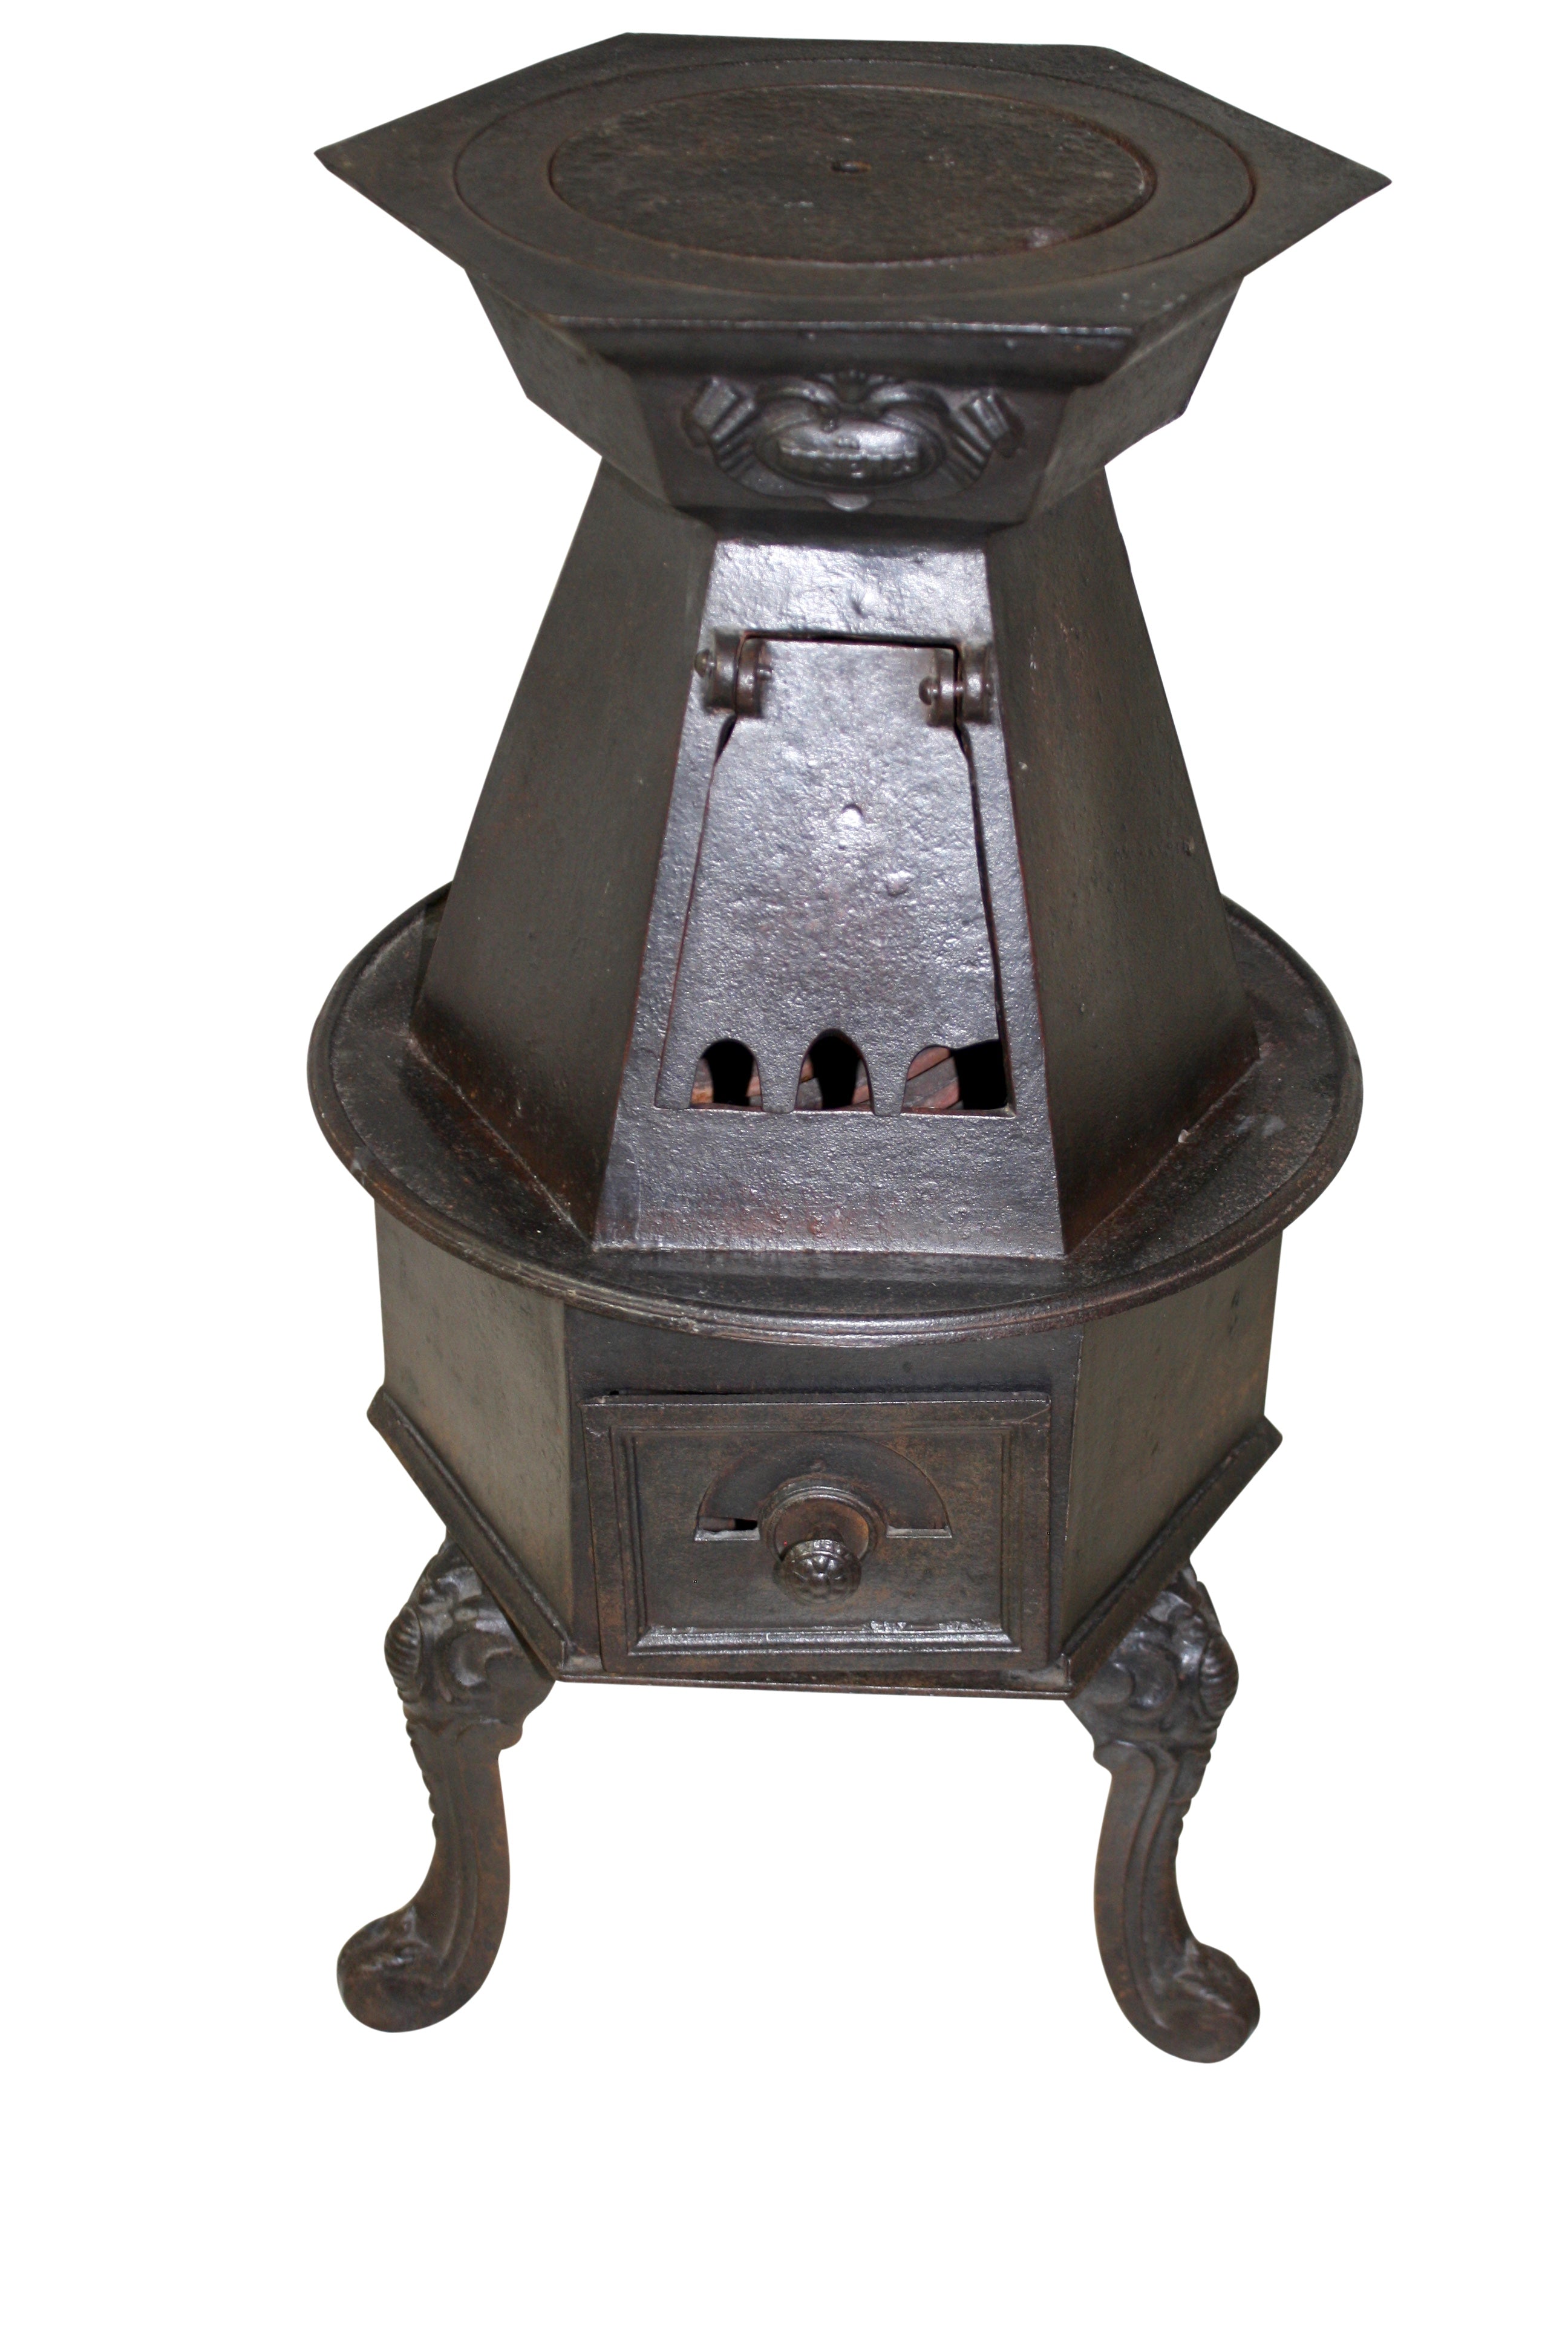 French Rosières Laundry Stove with Six Irons